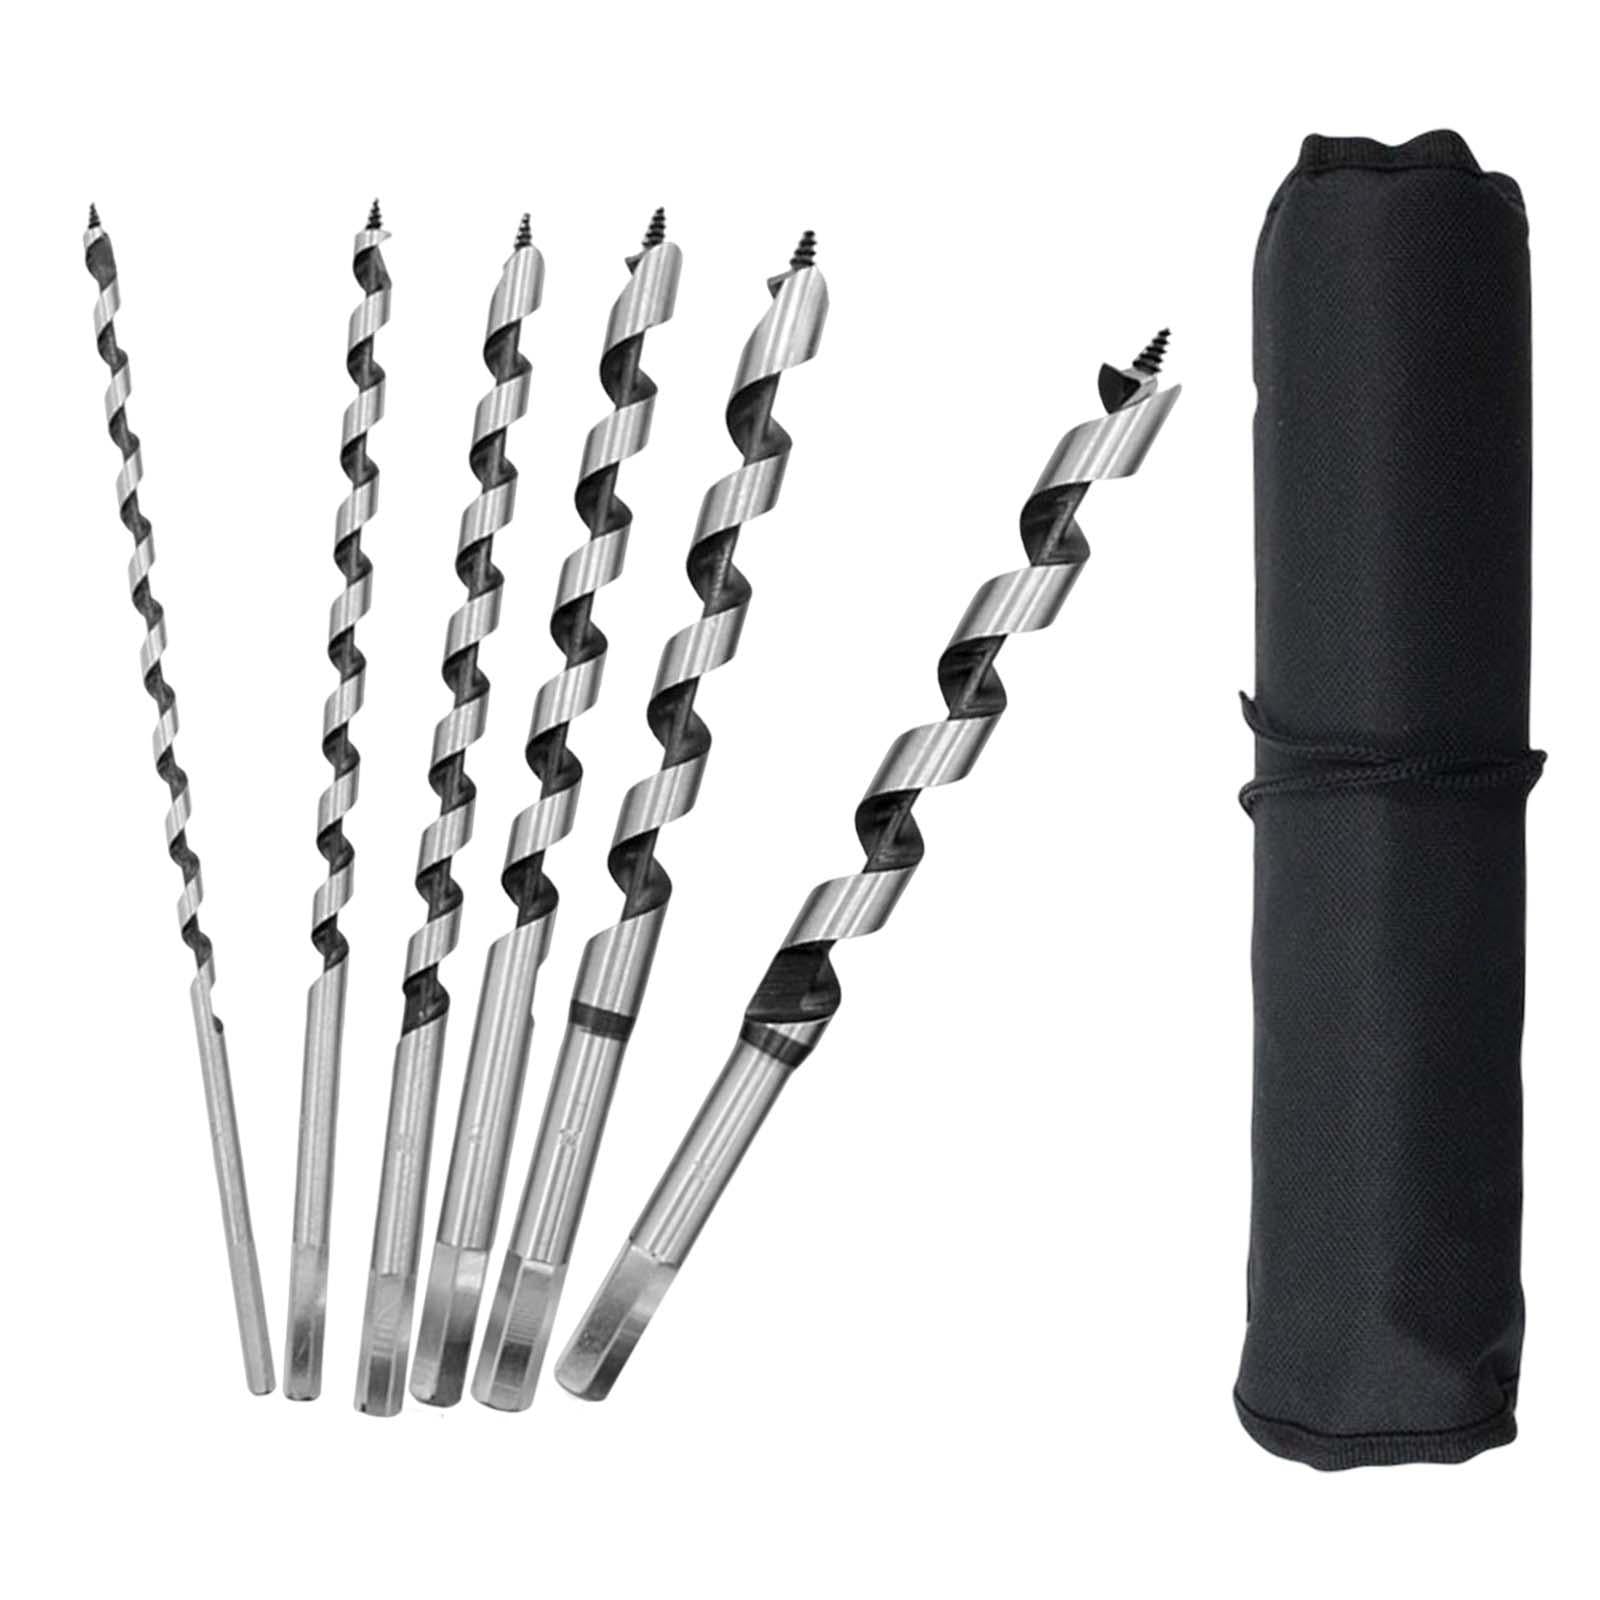 6 Pieces Auger Drill Bit 230mm for Metal Iron Wood Resin Beads Jewelry